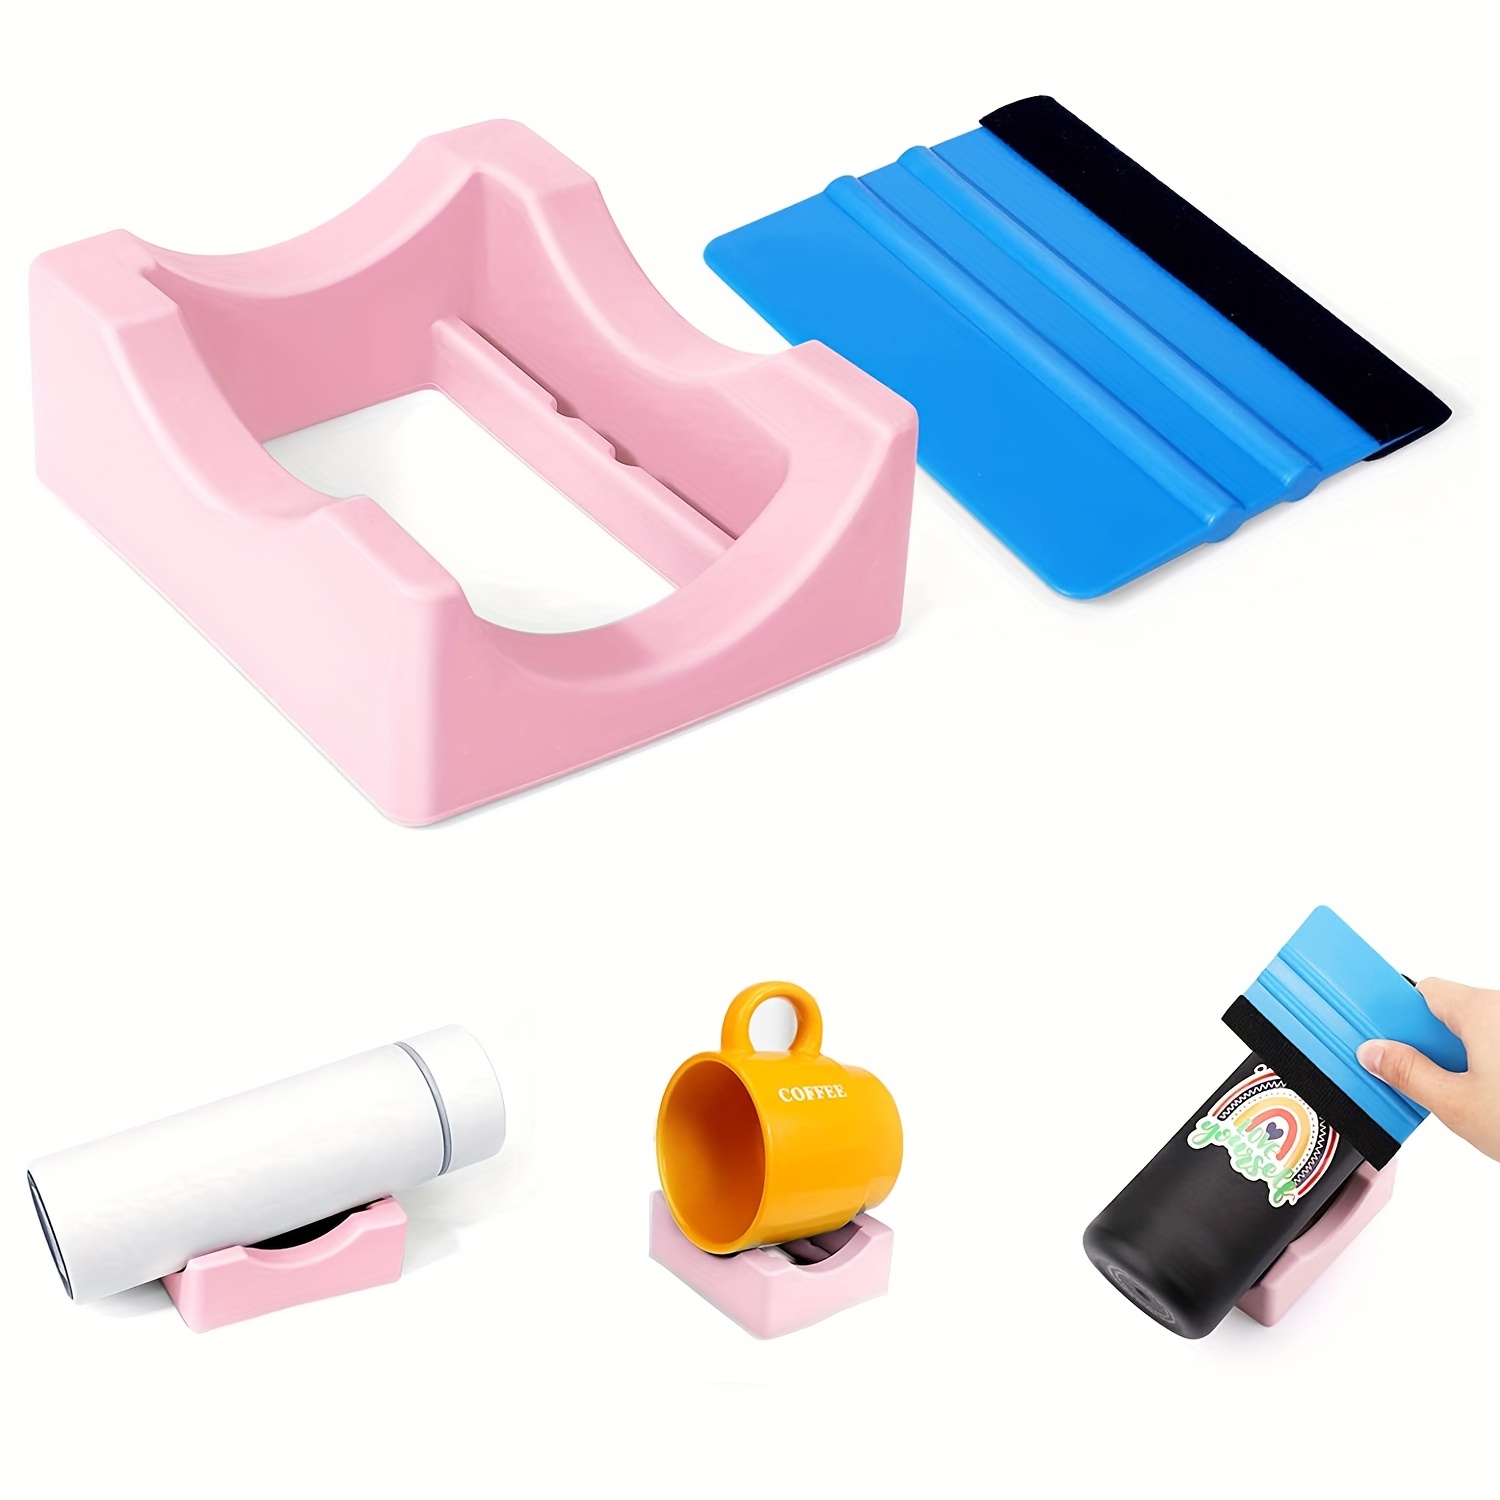 Silicone Cup Cradle for Tumblers with Built-in Slot, Crafts Use to